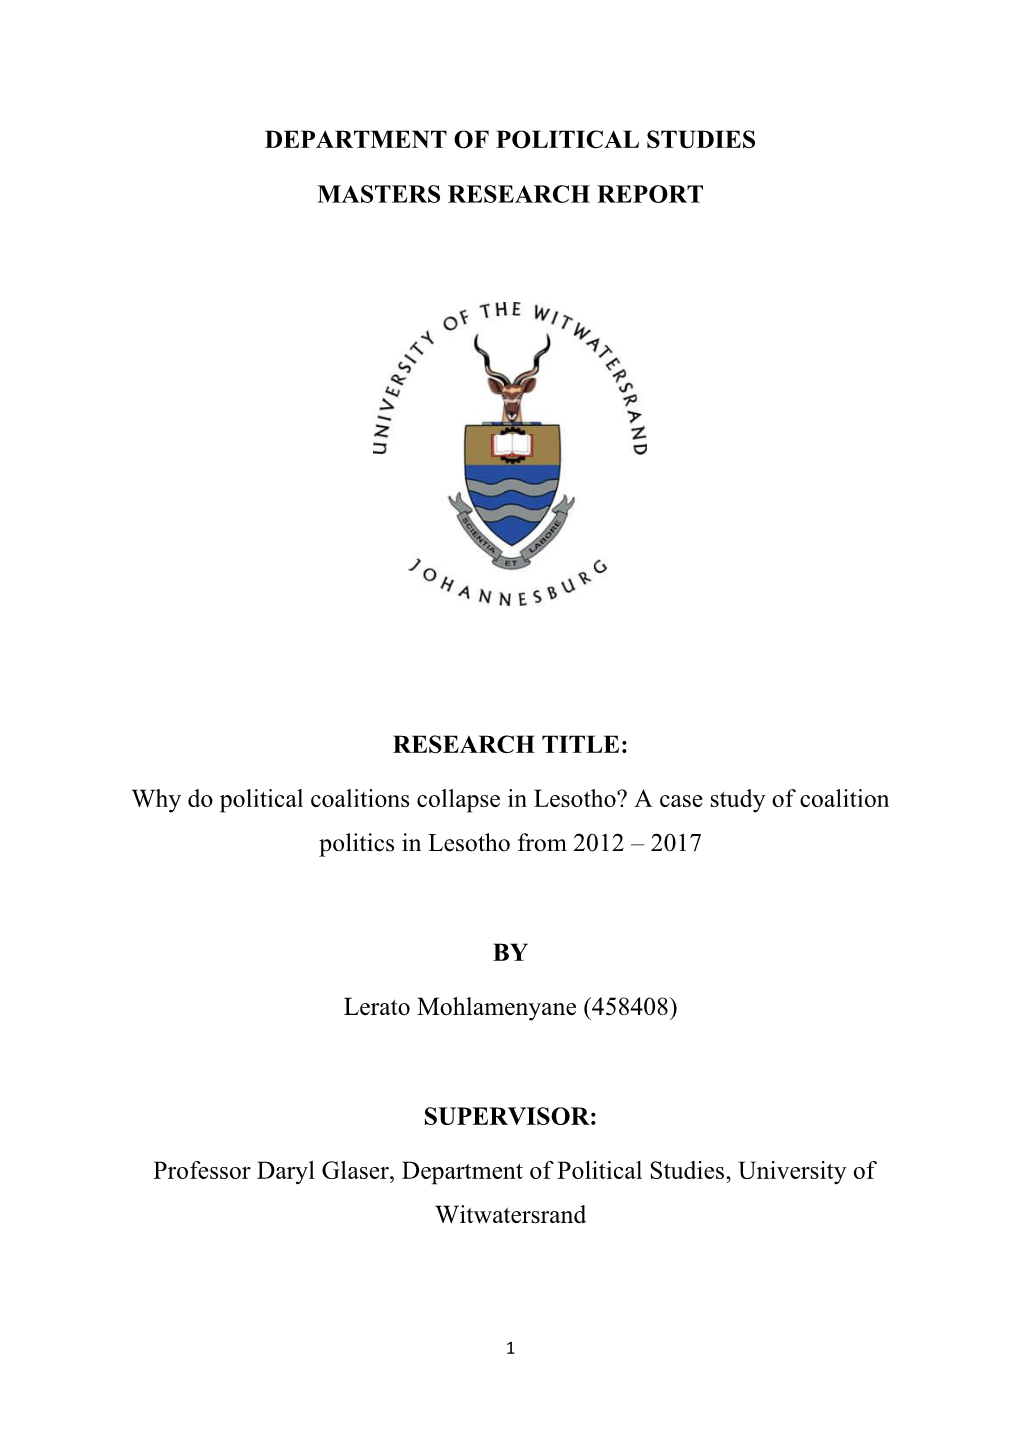 Why Do Political Coalitions Collapse in Lesotho? a Case Study of Coalition Politics in Lesotho from 2012 – 2017